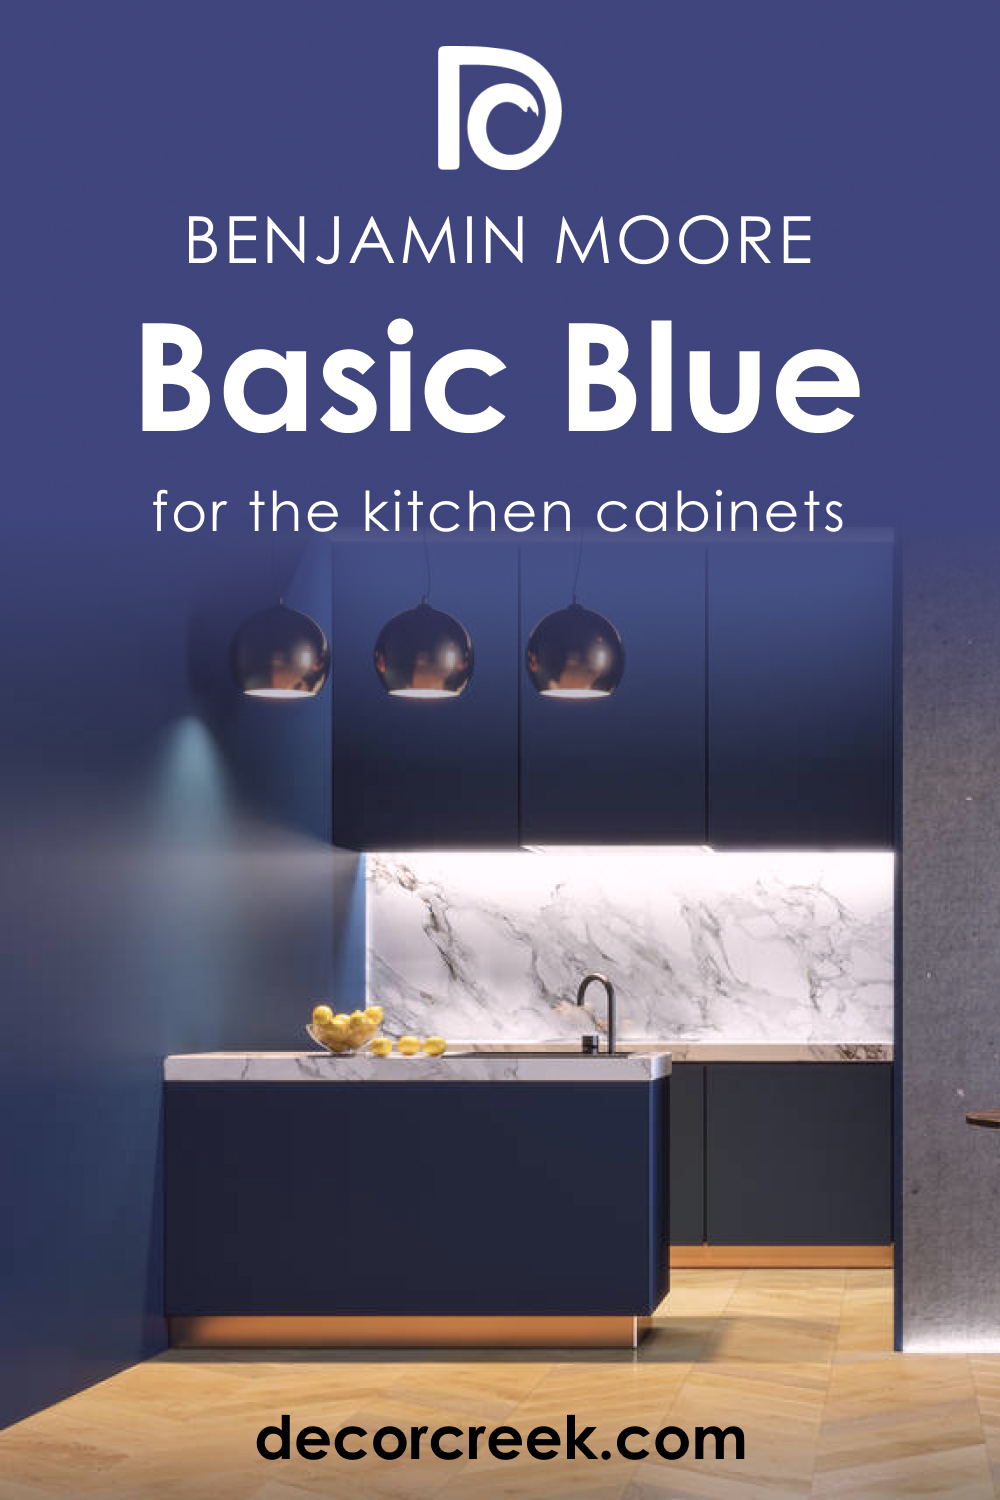 How to Use Basic Blue CC-968 on the Kitchen Cabinets?